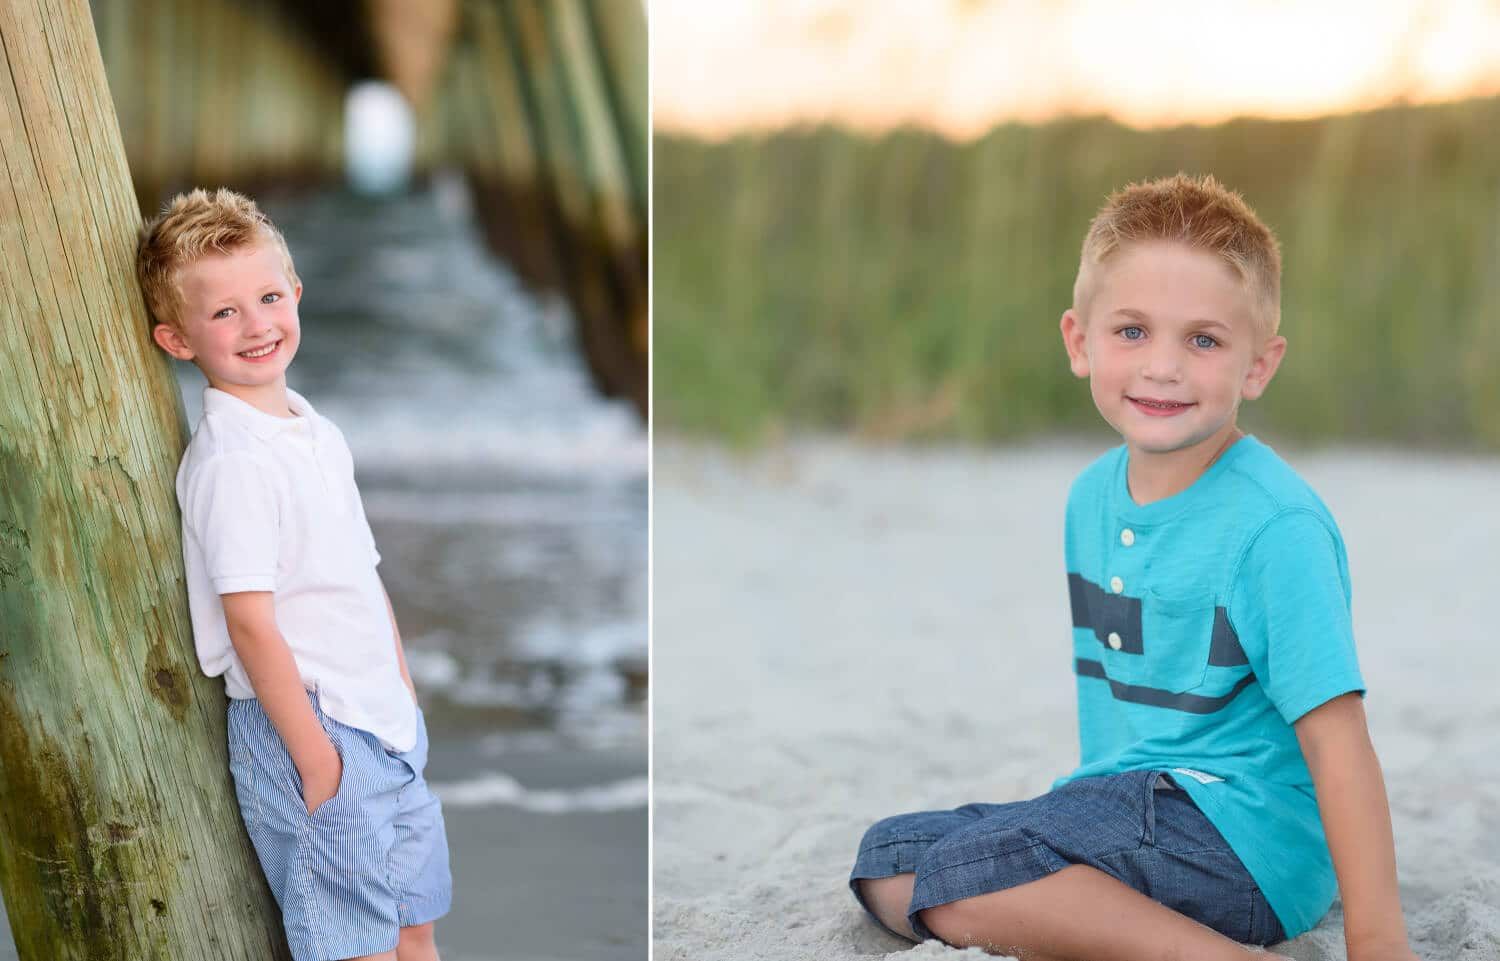 Portraits of two boys with 85mm f1.4 lens